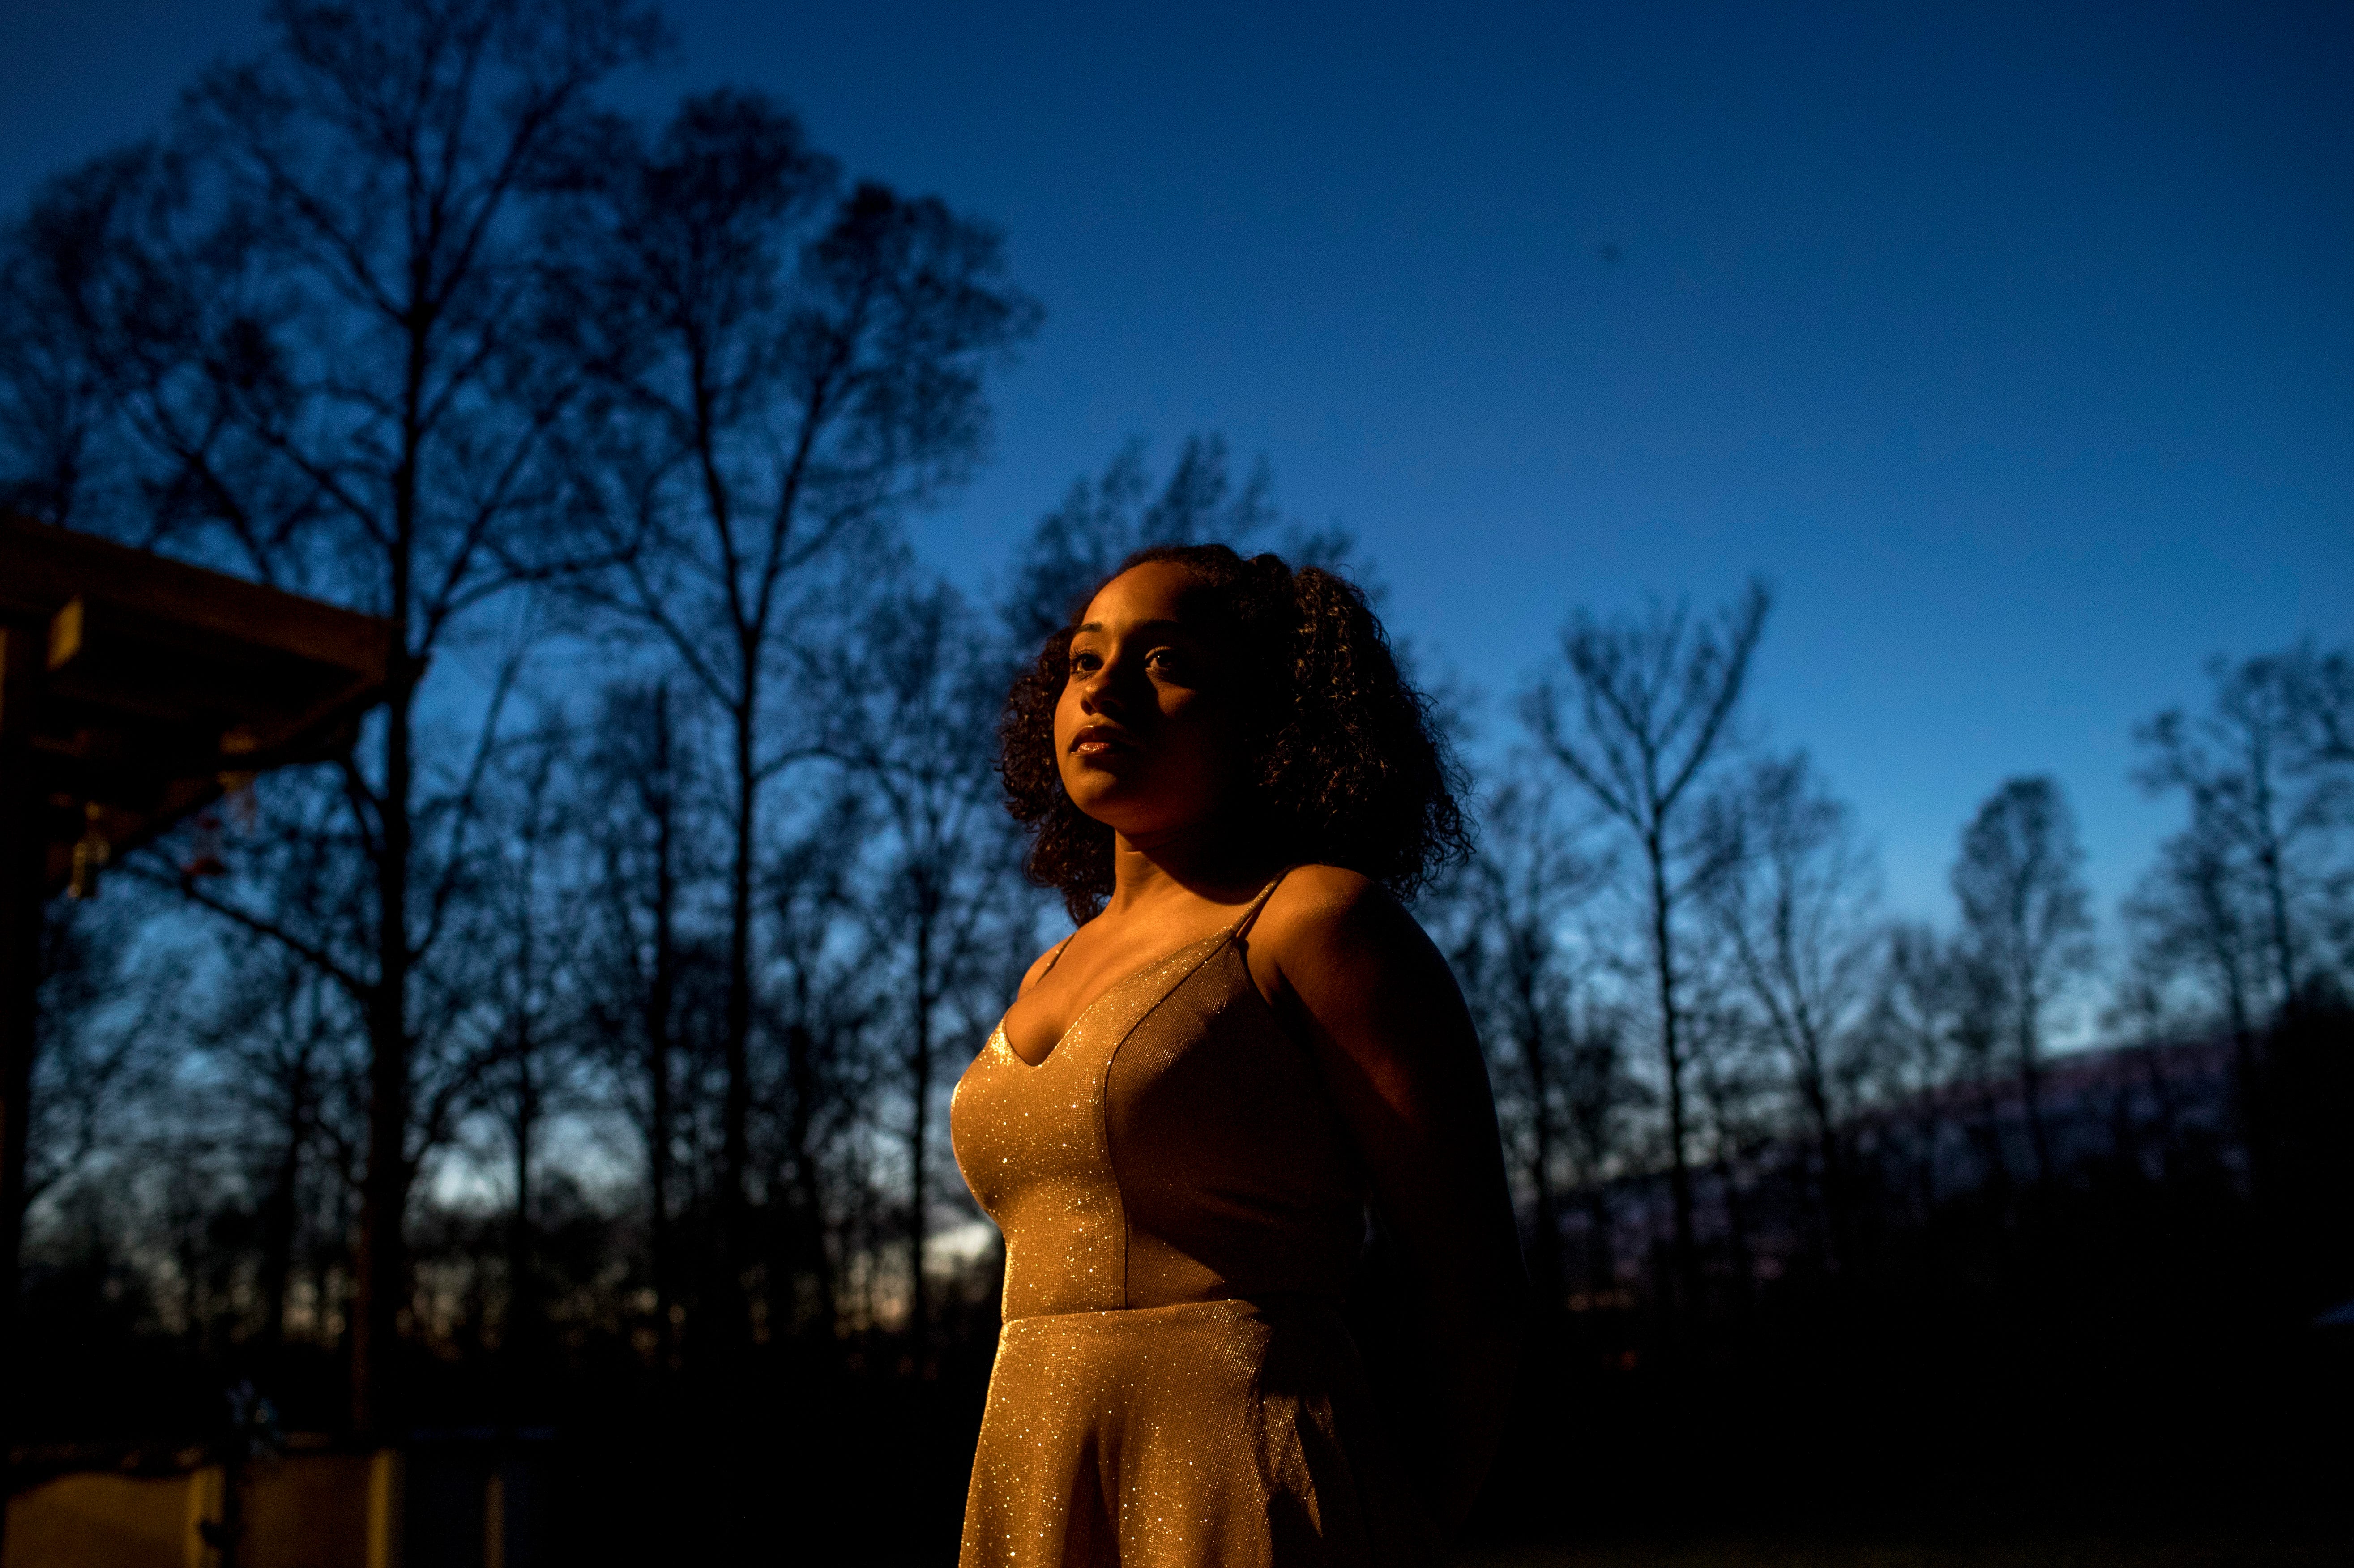 Hope Johnson, a Montgomery Central track athlete who will miss her senior season because of the coronavirus pandemic, stands in her backyard in Cunningham, Tenn., for a portrait while wearing the dress she would have worn to prom on March 29, 2020.